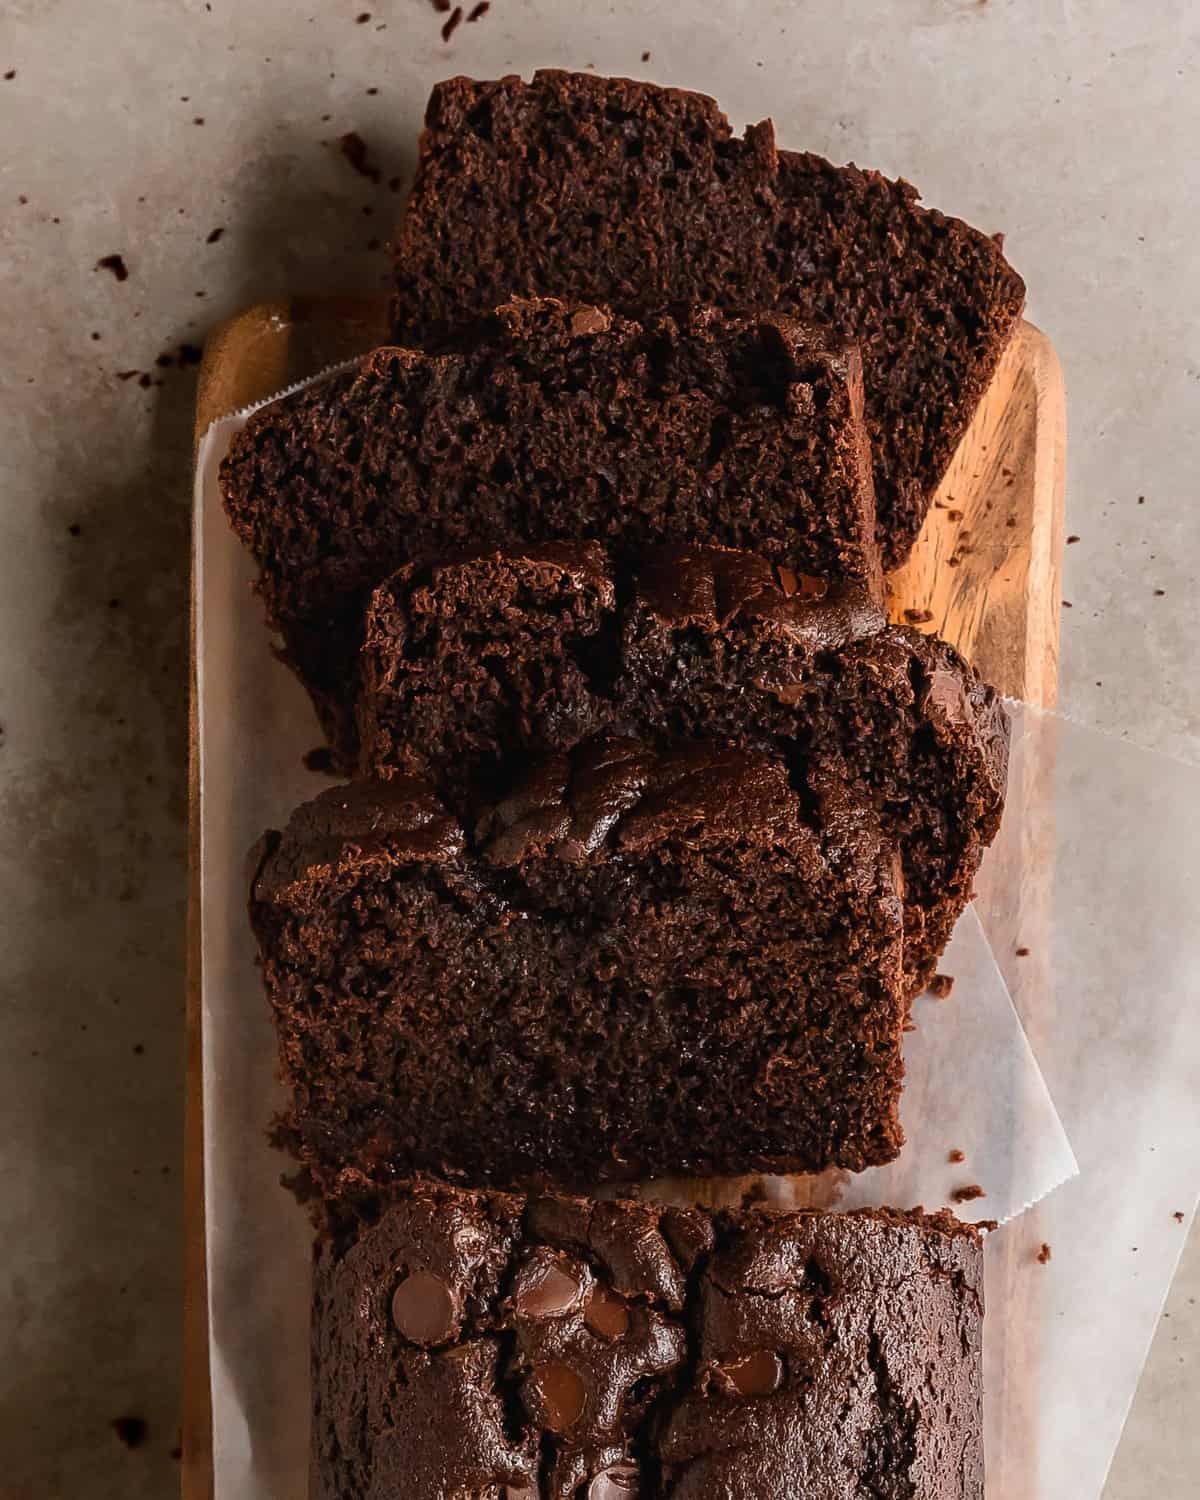 Chocolate bread is a moist, soft and rich chocolate loaf cake. This chocolate bread recipe is quick and easy to make in one bow and requires no yeast.  Make this chocolate quick bread for perfect simple and decadent breakfast, snack or dessert. 